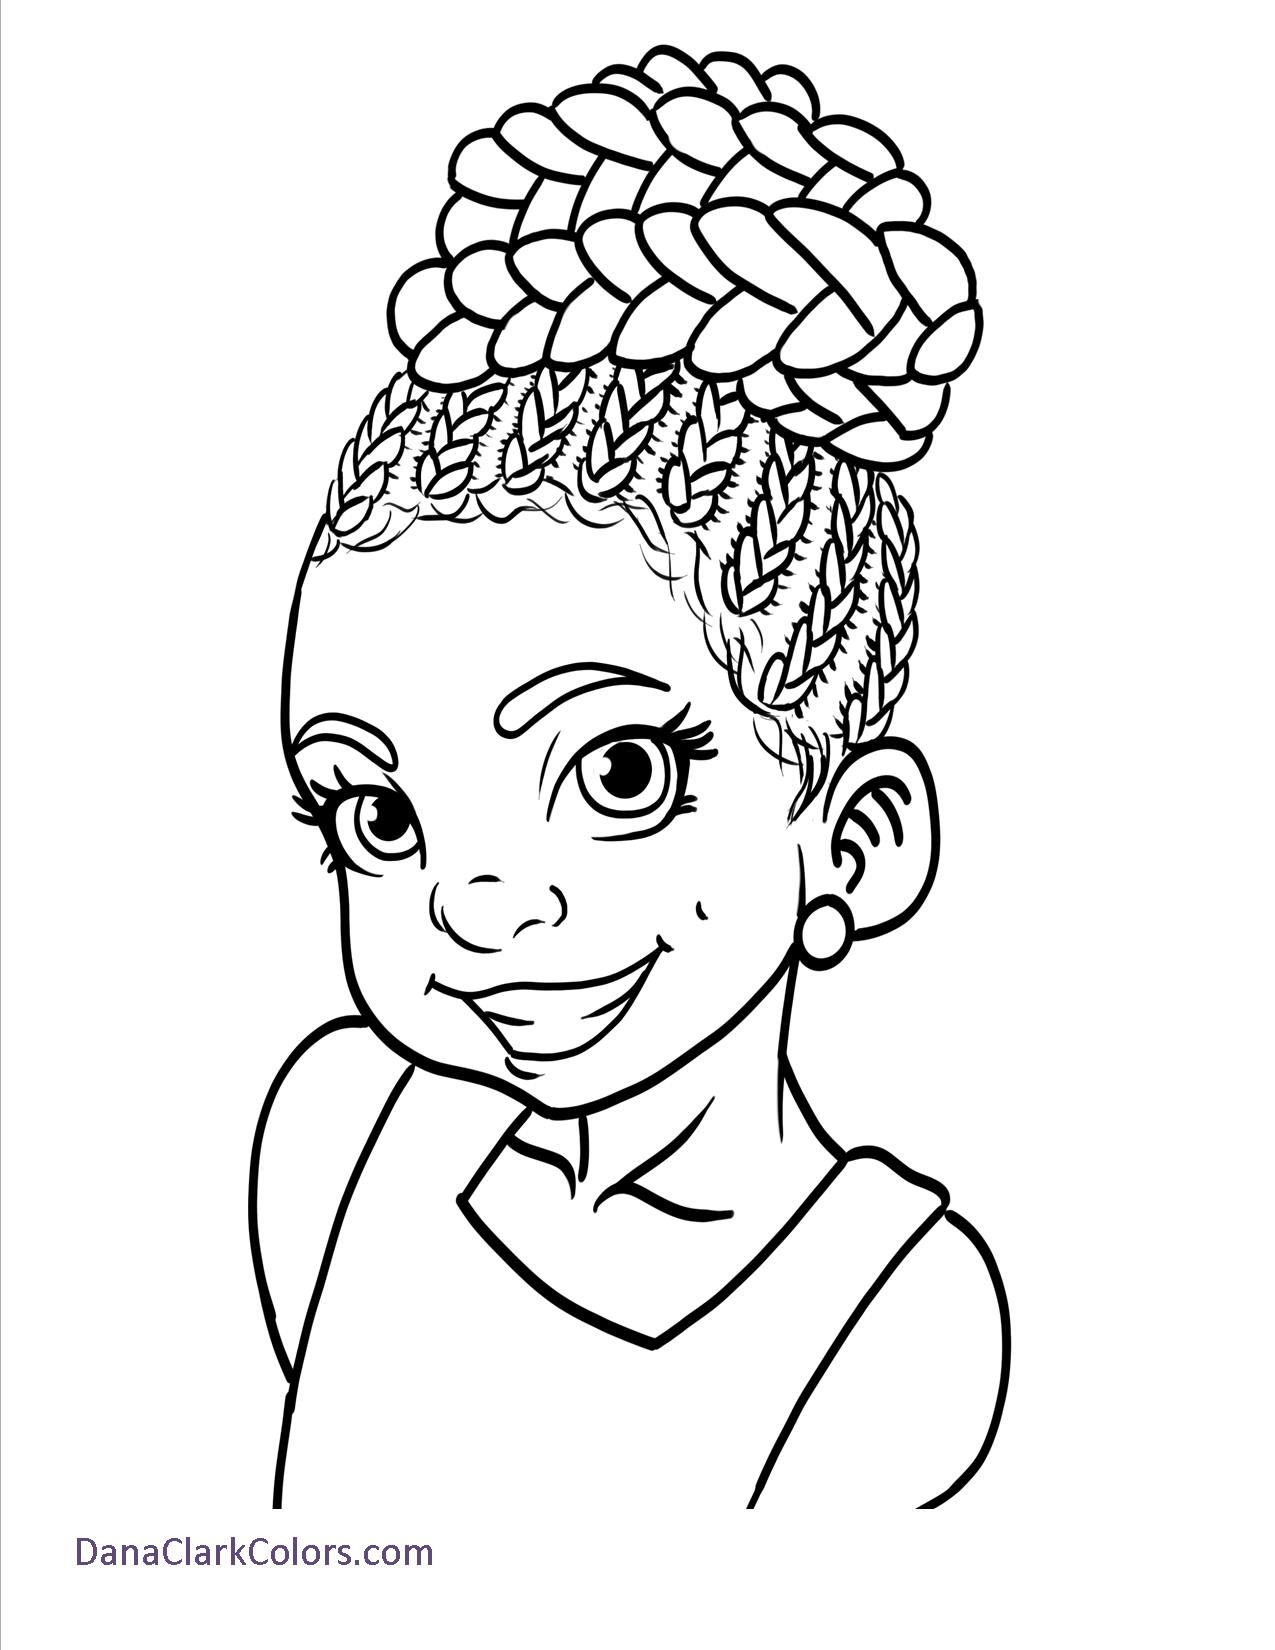 Black Girls Coloring Pages
 Free Coloring Pages DanaClarkColors